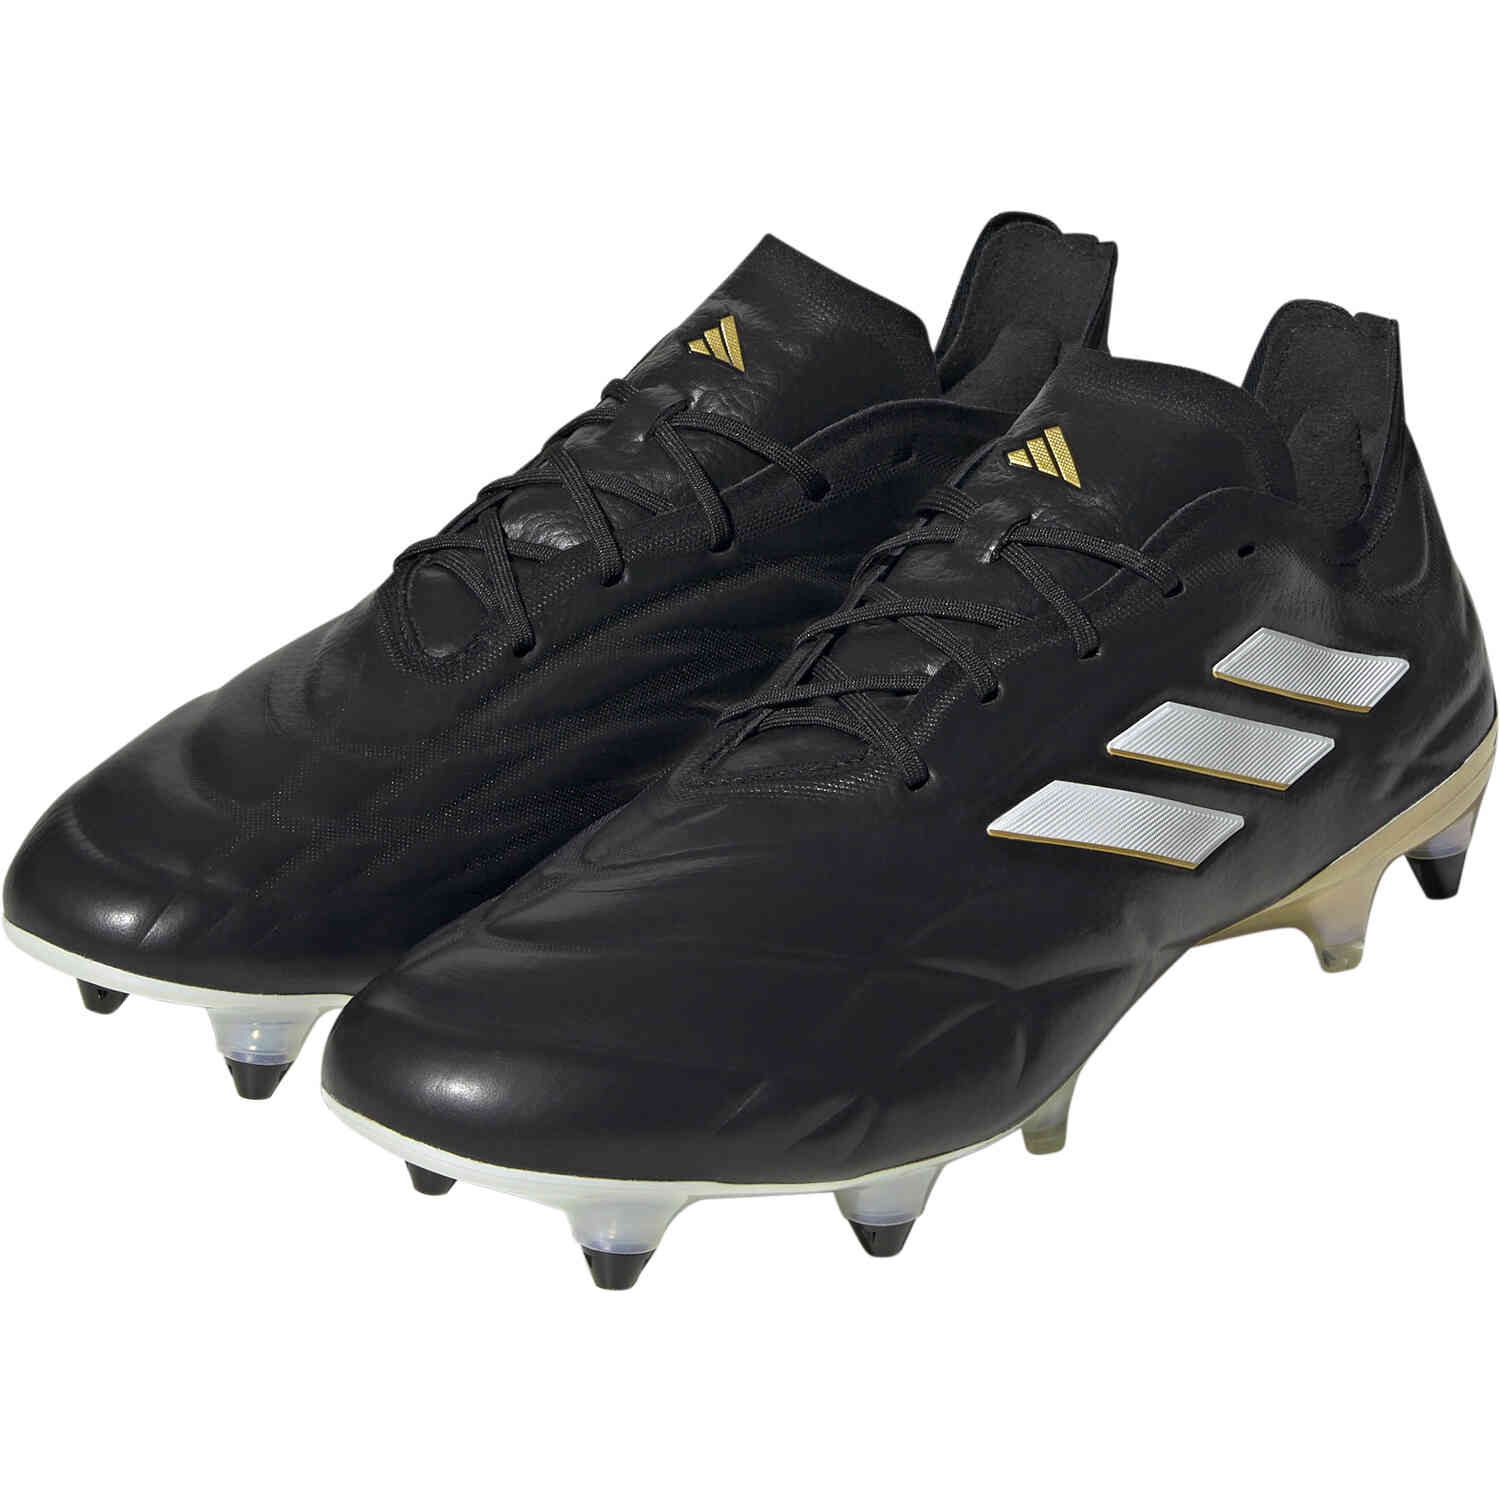 adidas Copa Pure+ SG Soft Ground Soccer Cleats - Black, White & Metallic Gold - Soccer